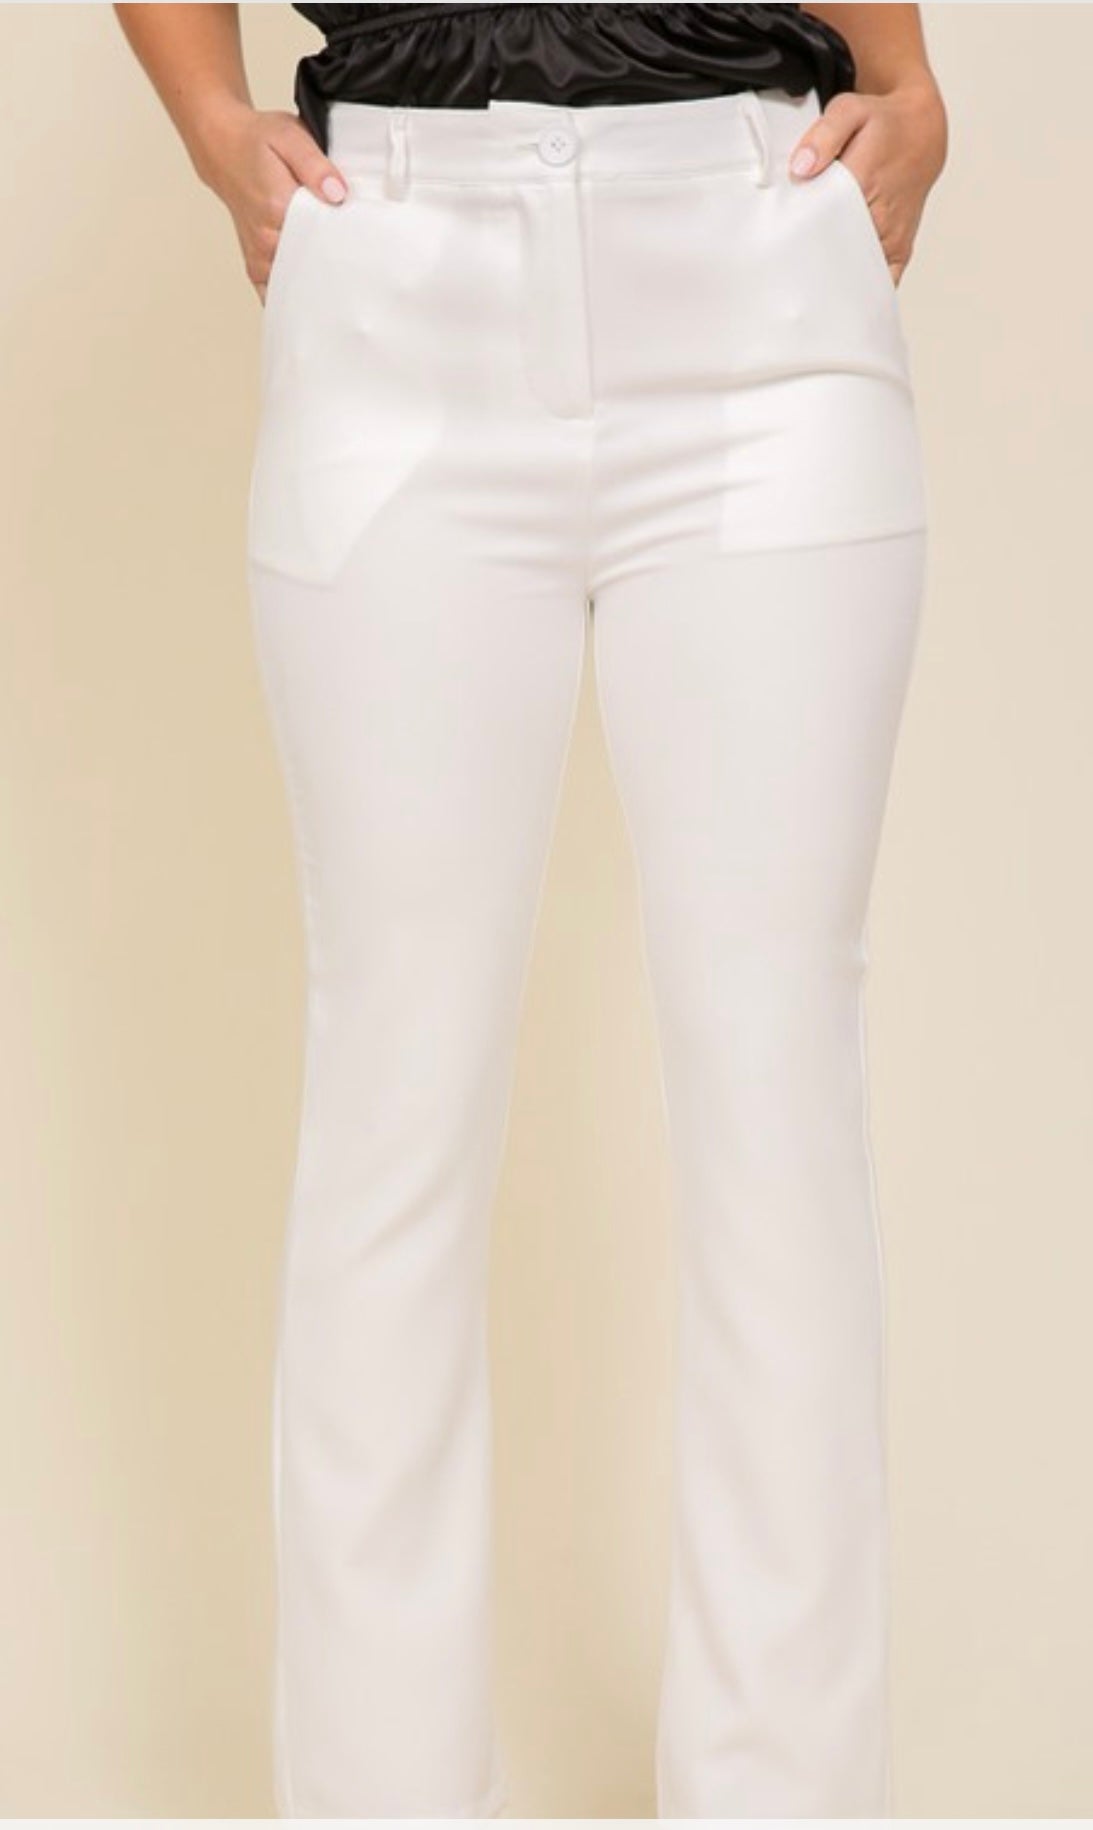 The Office Pants (White)